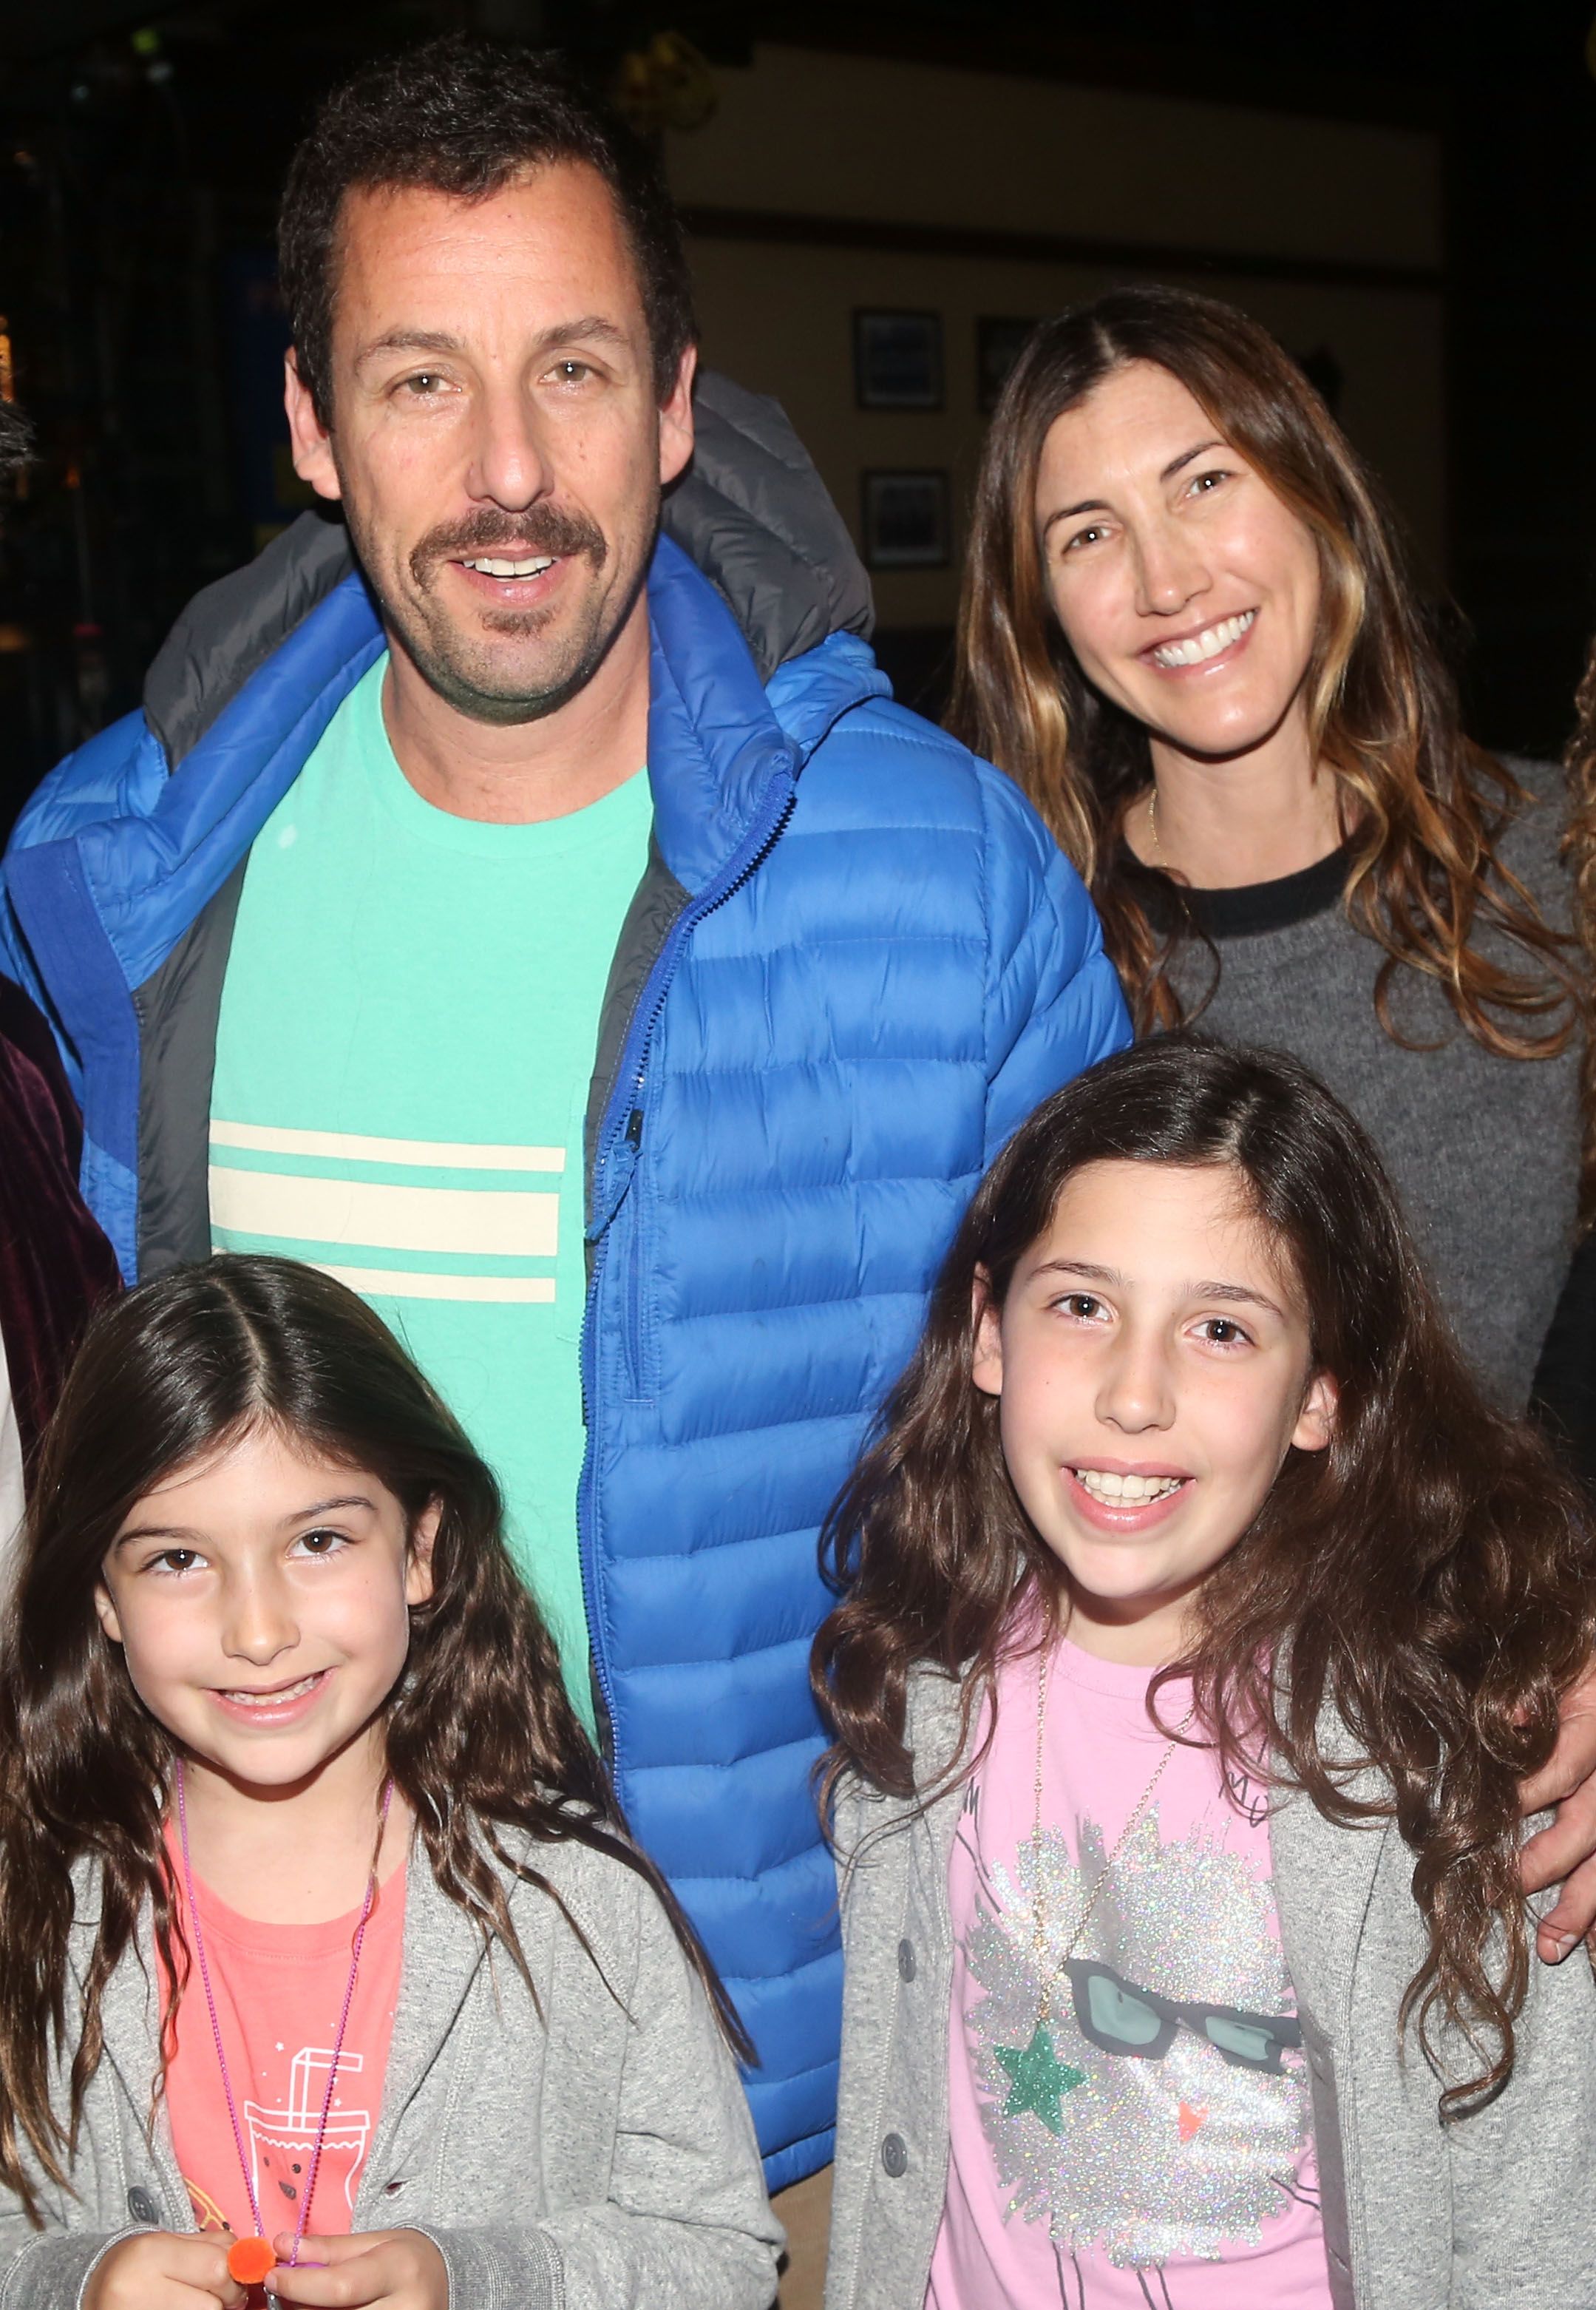 Adam Sandler with daughters Sunny and Sadie Sandler, and wife Jackie Sandler backstage at the hit musical "School of Rock" in 2016 in New York City | Source: Getty Images